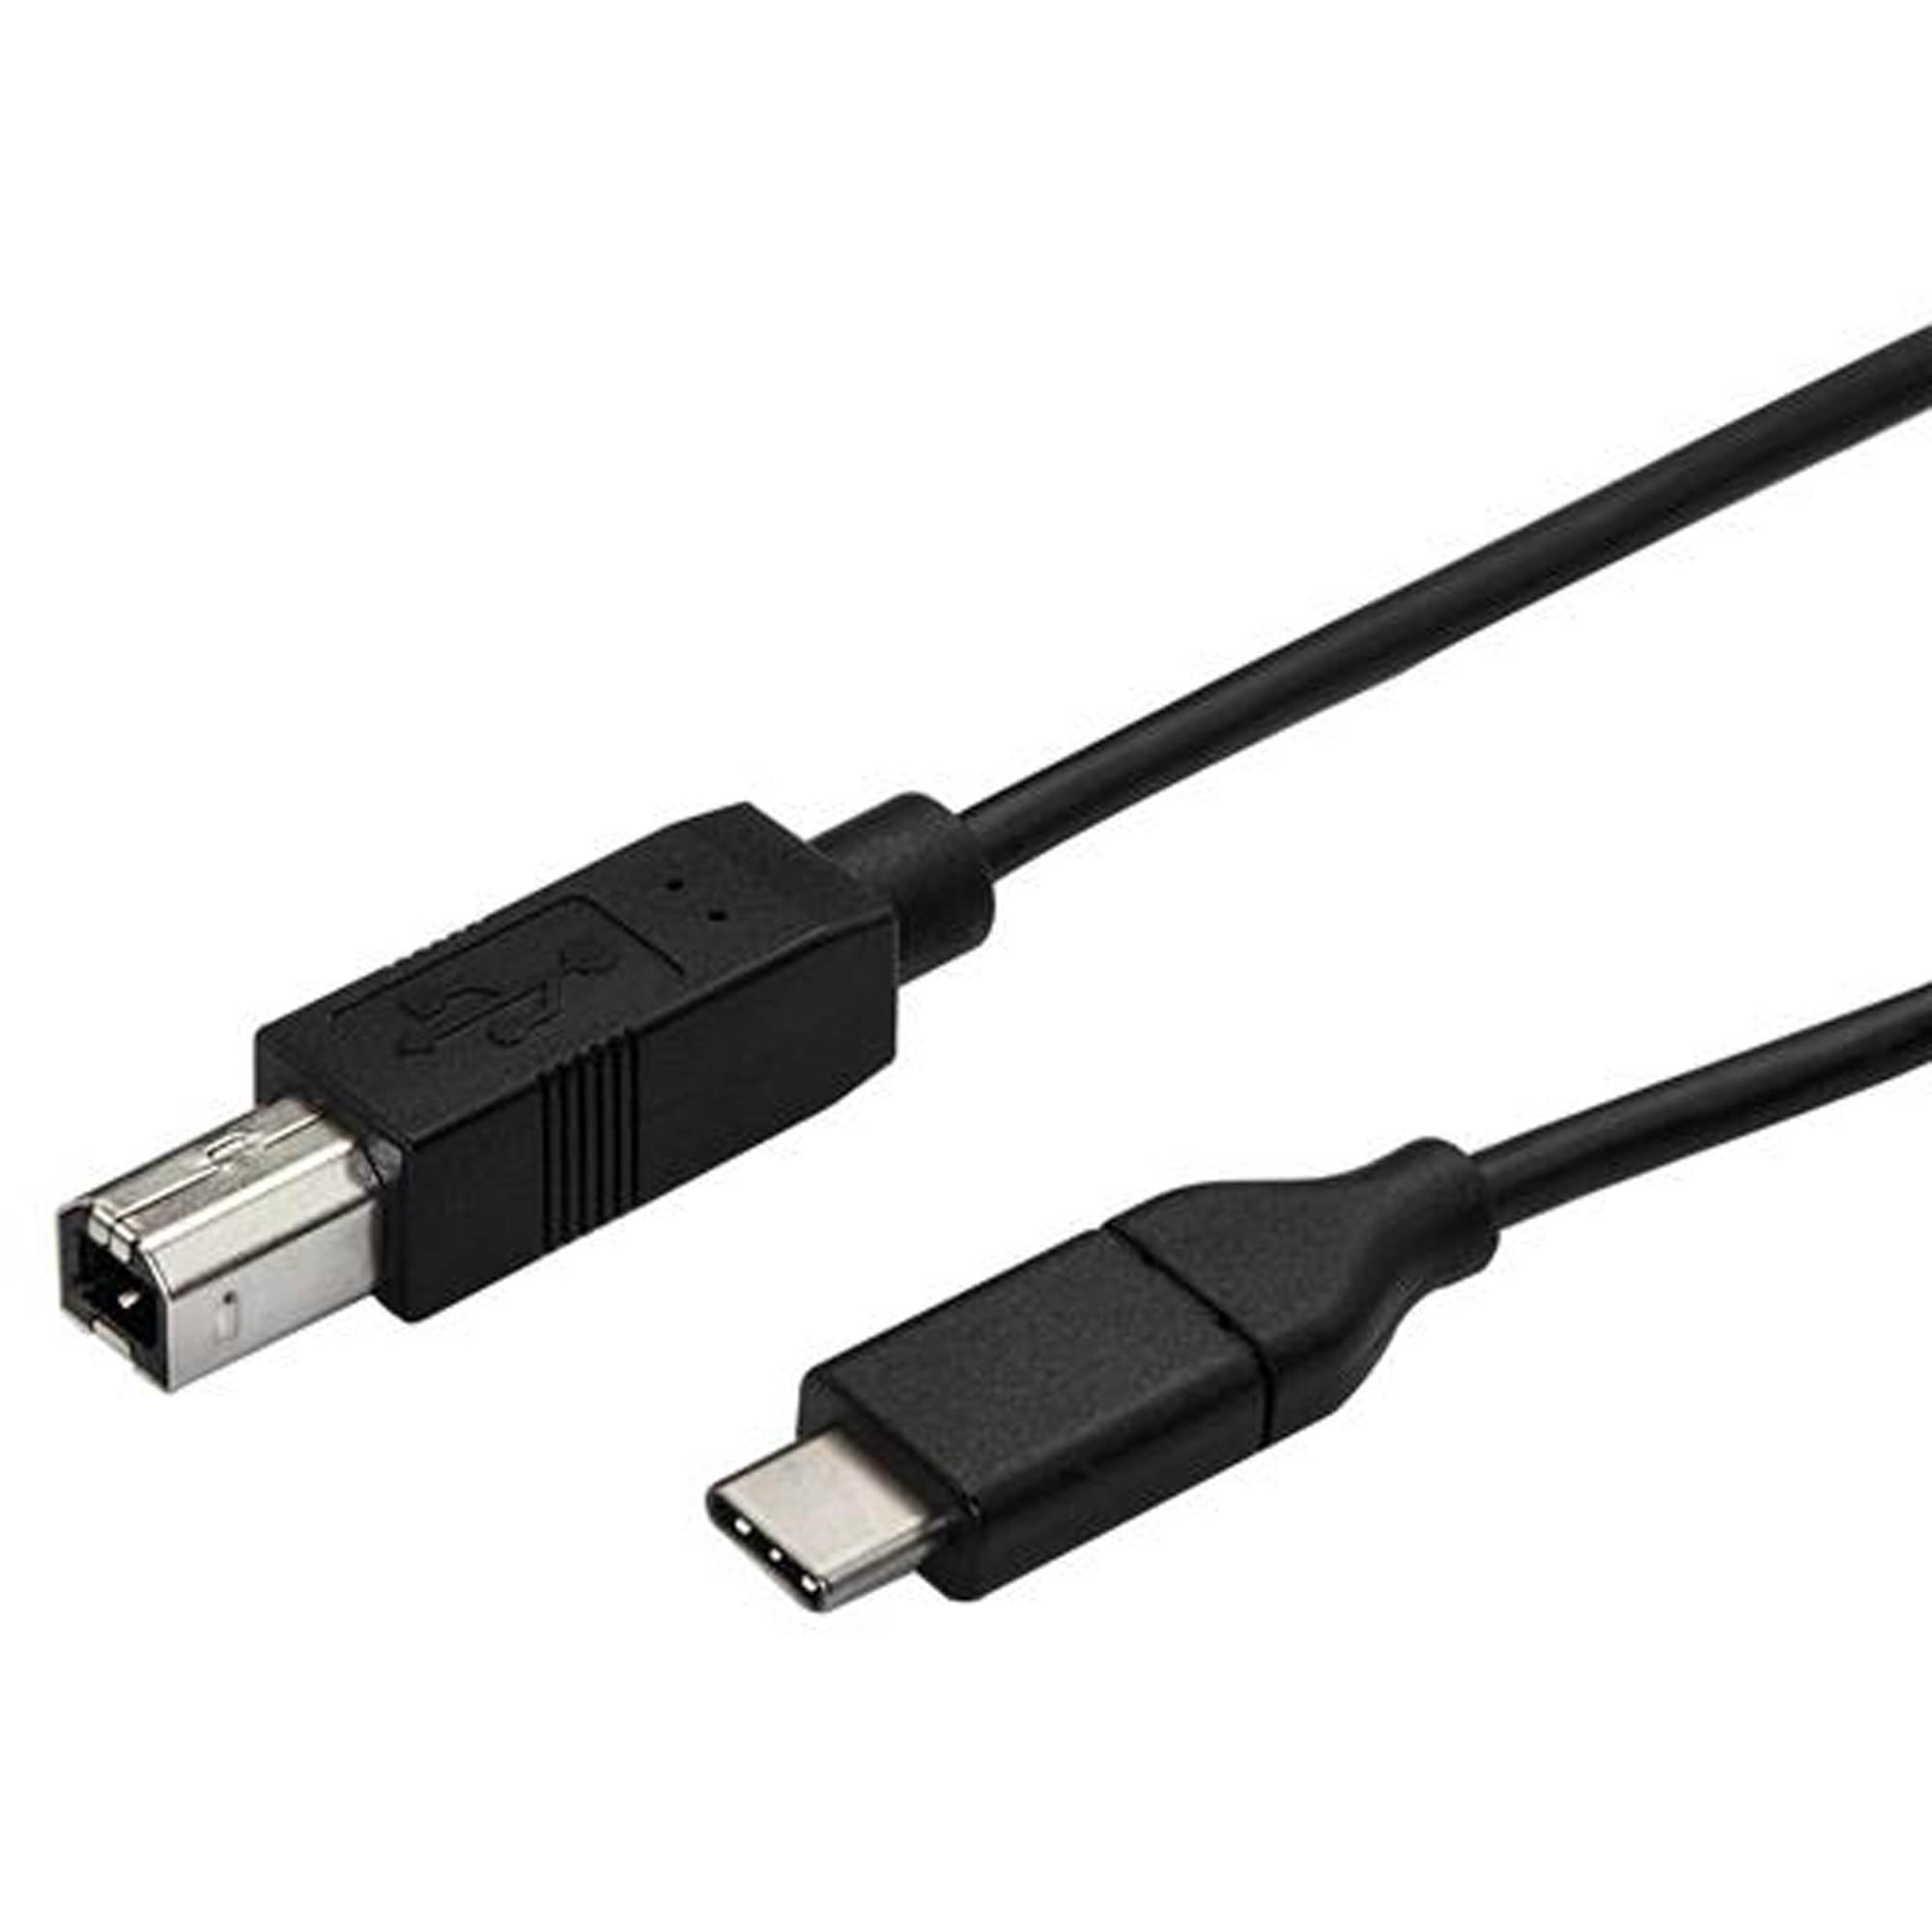 16 ft. * Gold Series High-Speed USB 2.0 Cable